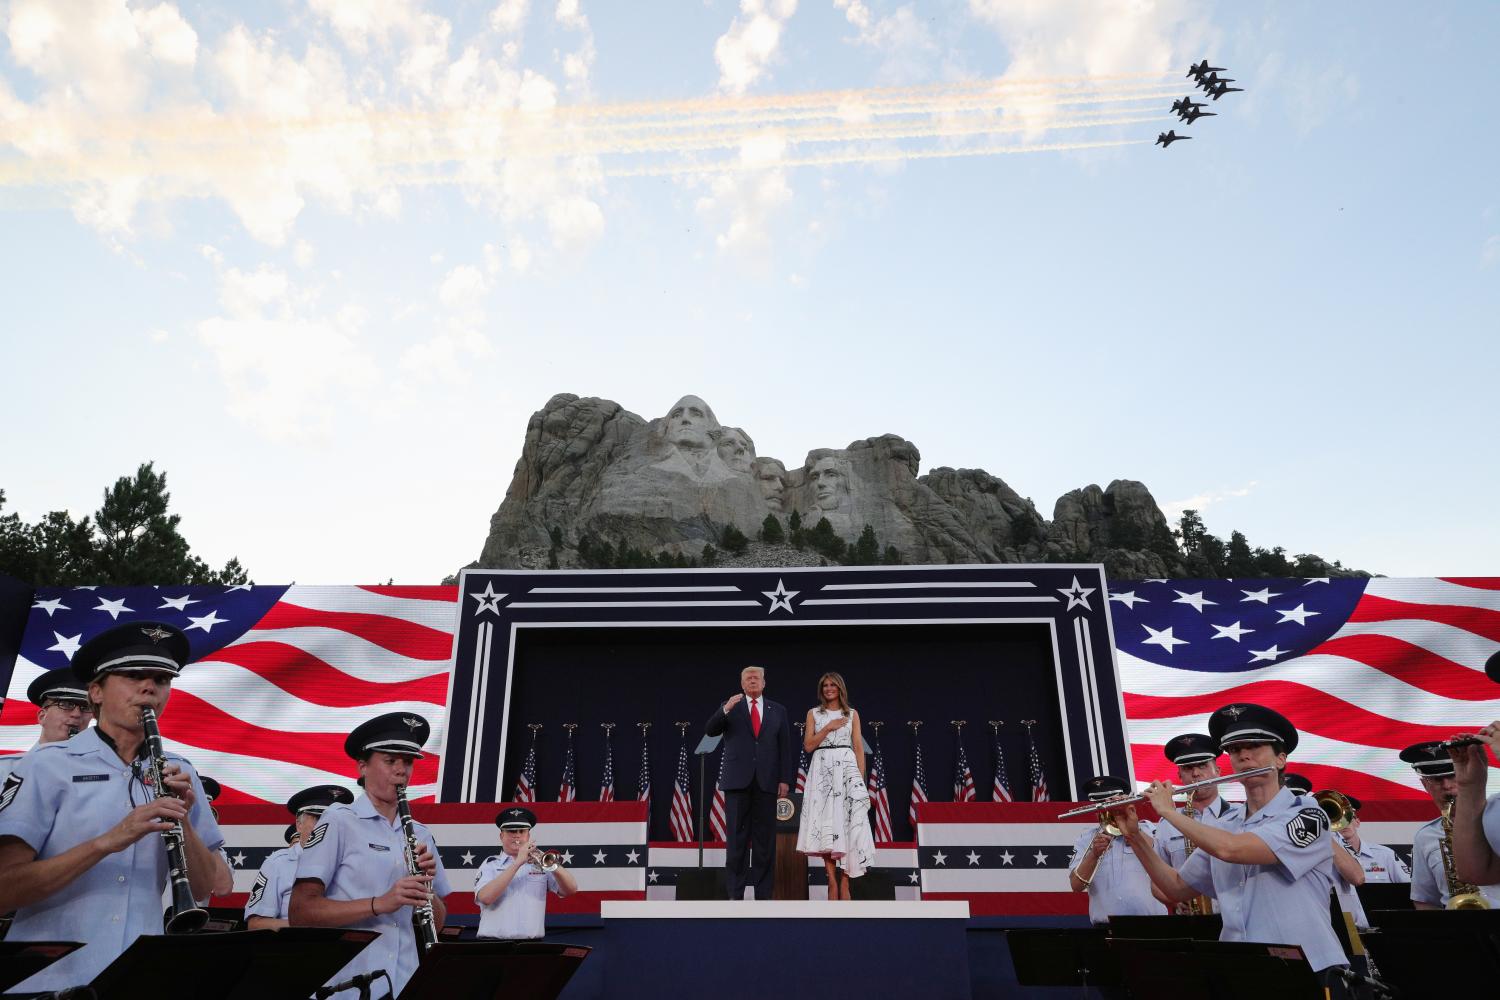 An aerial flypast takes place as U.S. President Donald Trump and first lady Melania Trump attend South Dakota's U.S. Independence Day Mount Rushmore fireworks celebrations at Mt. Rushmore in Keystone, South Dakota, U.S., July 3, 2020. REUTERS/Tom Brenner